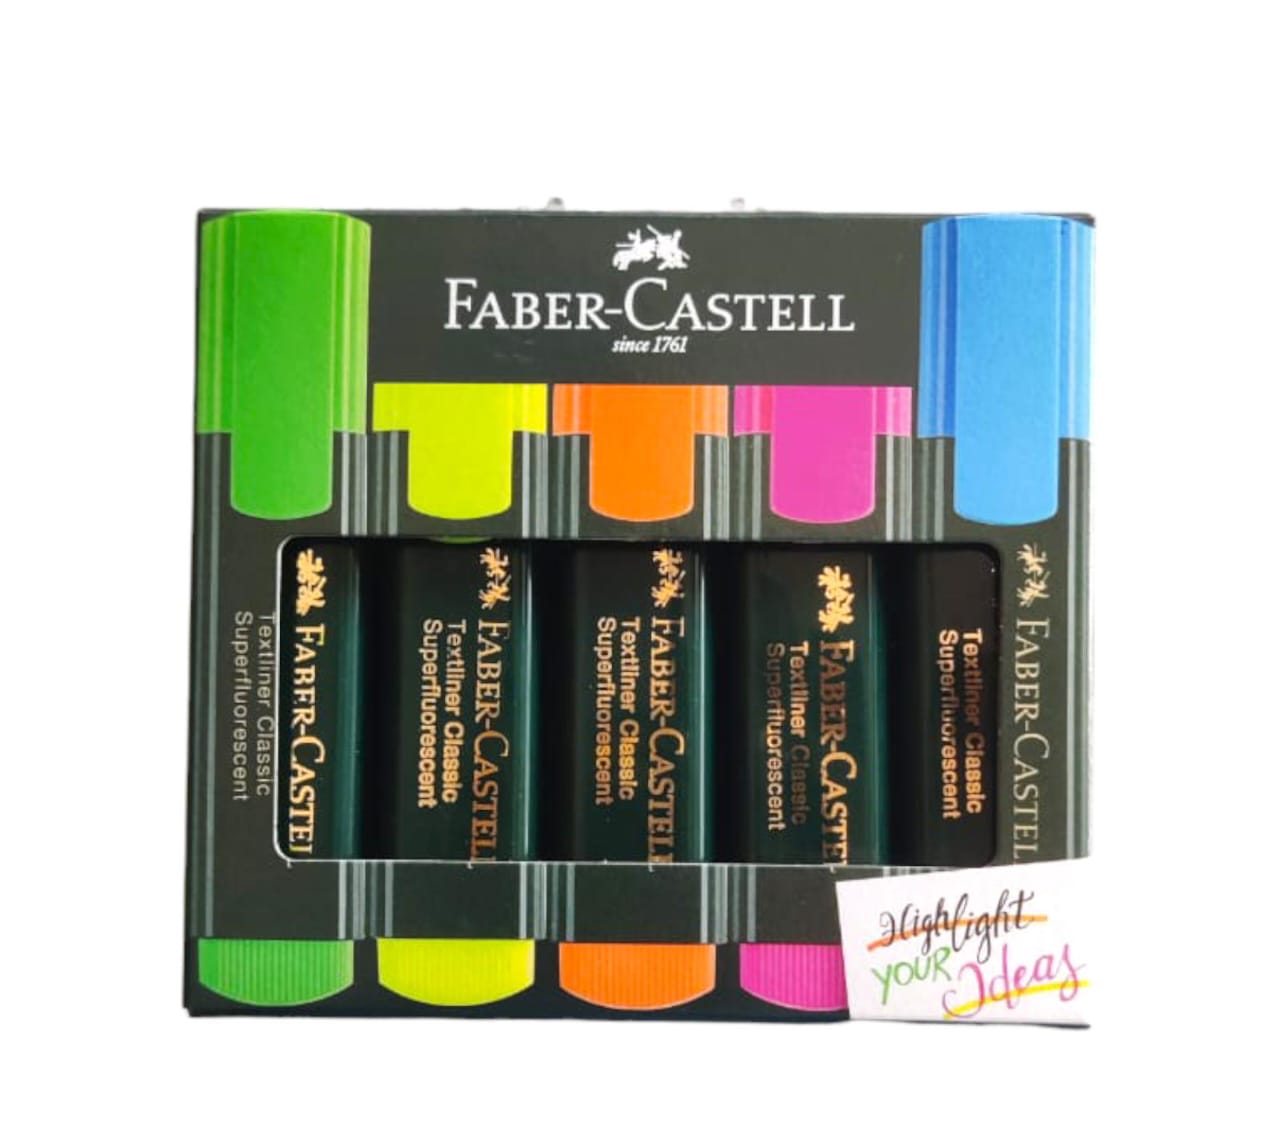 Faber castell classic five textliner 